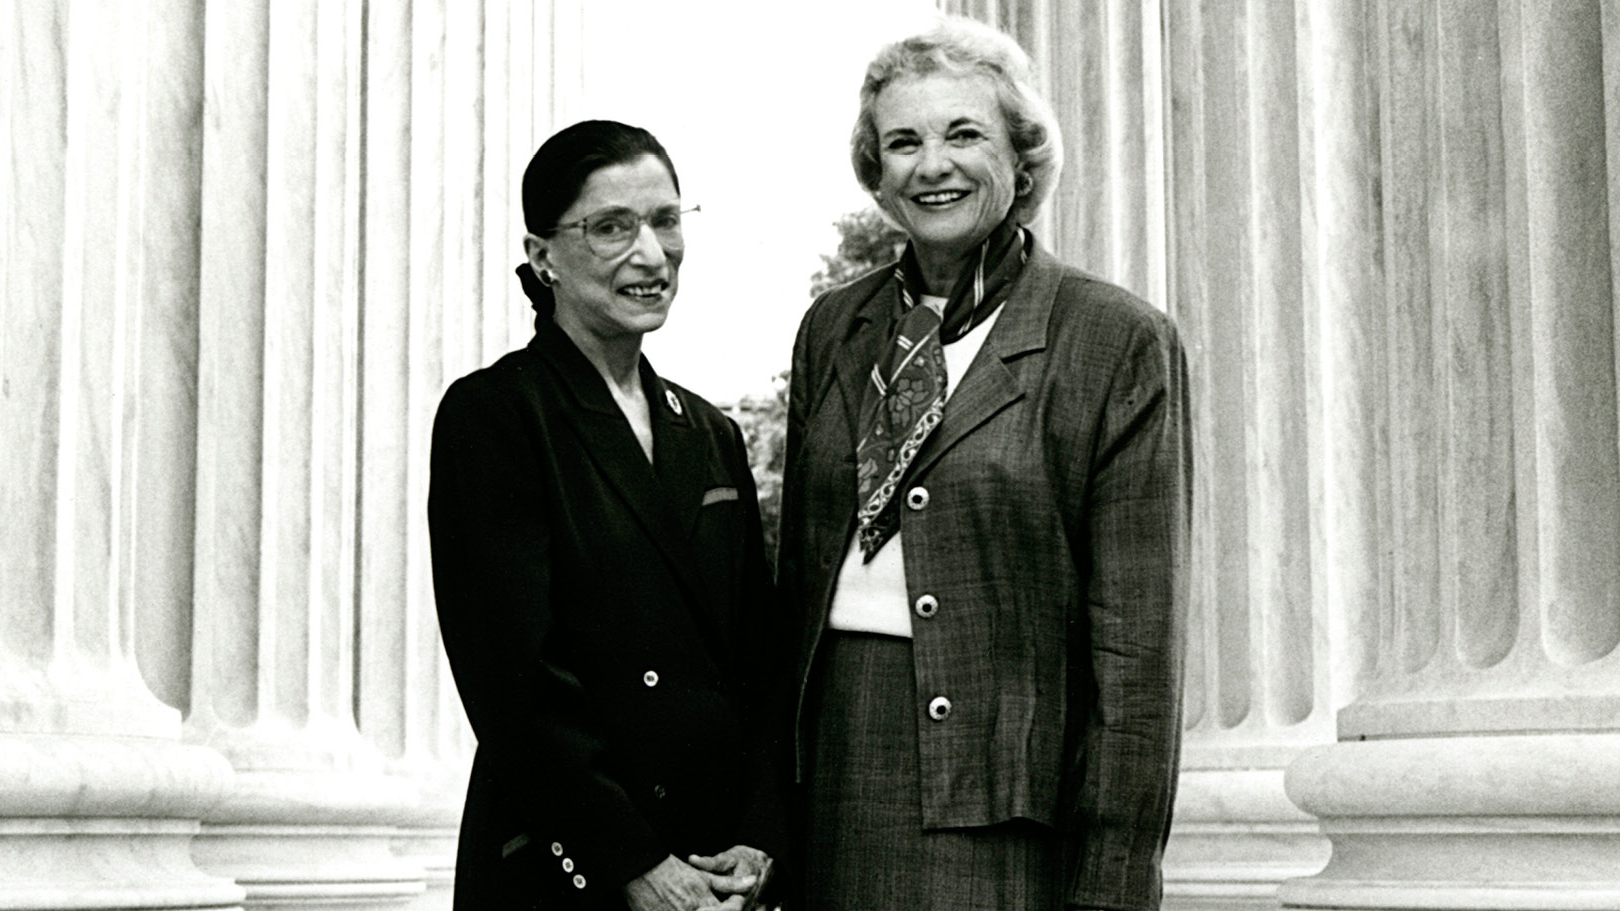 As different as their backgrounds were, and even their approaches to judging, when it came to women's rights, Ruth Bader Ginsburg (left) and Sandra Day O'Connor were allies.